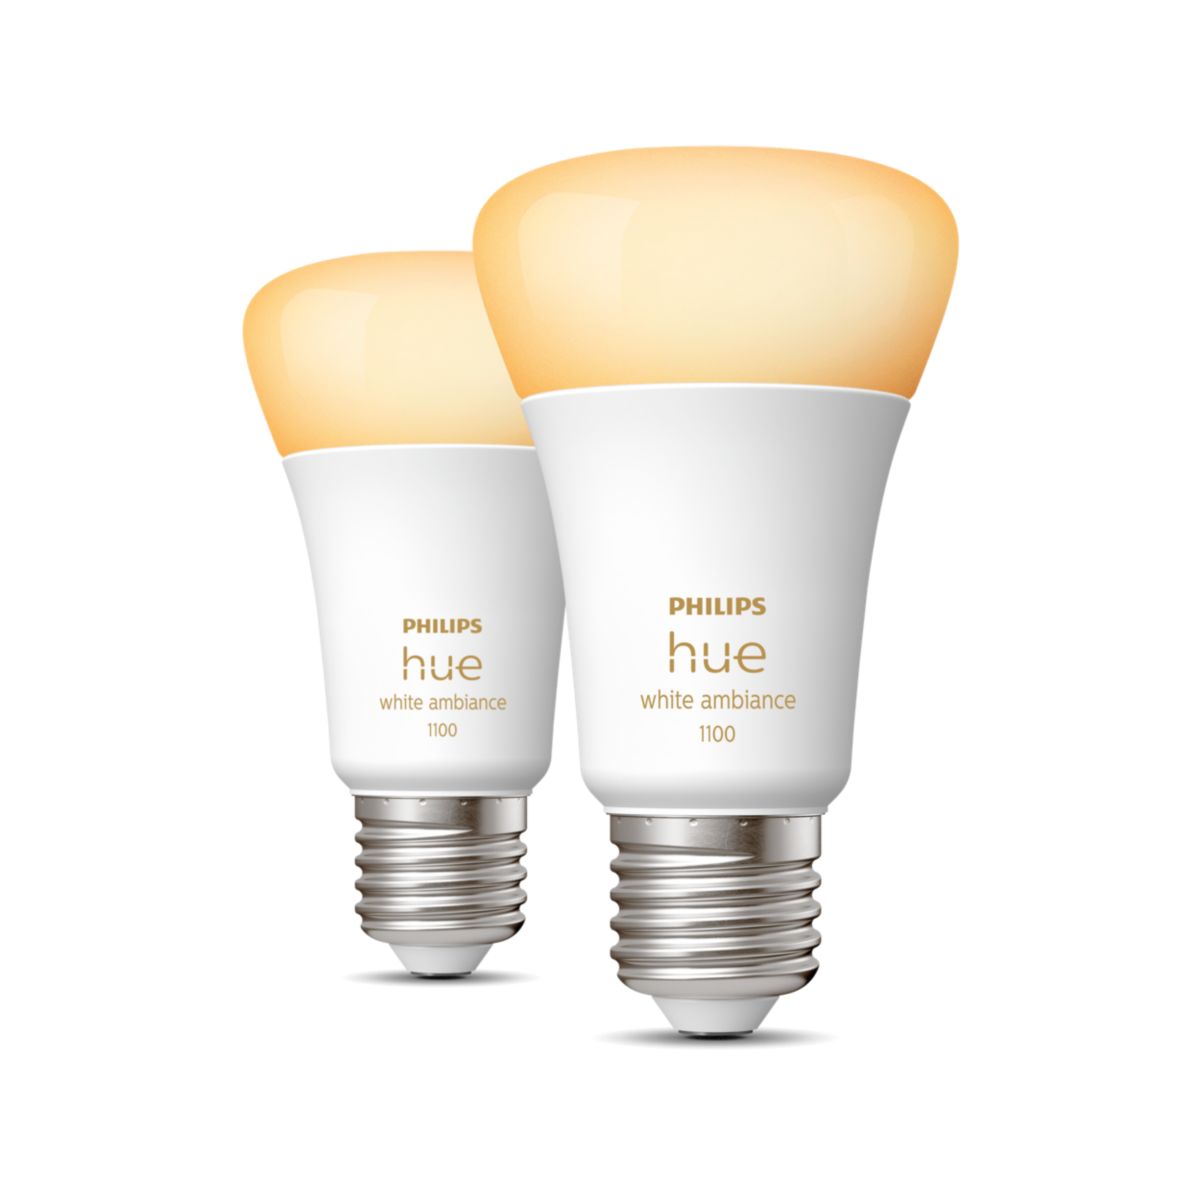 Philips Hue E27 white ambiance 1100lm 2-pack